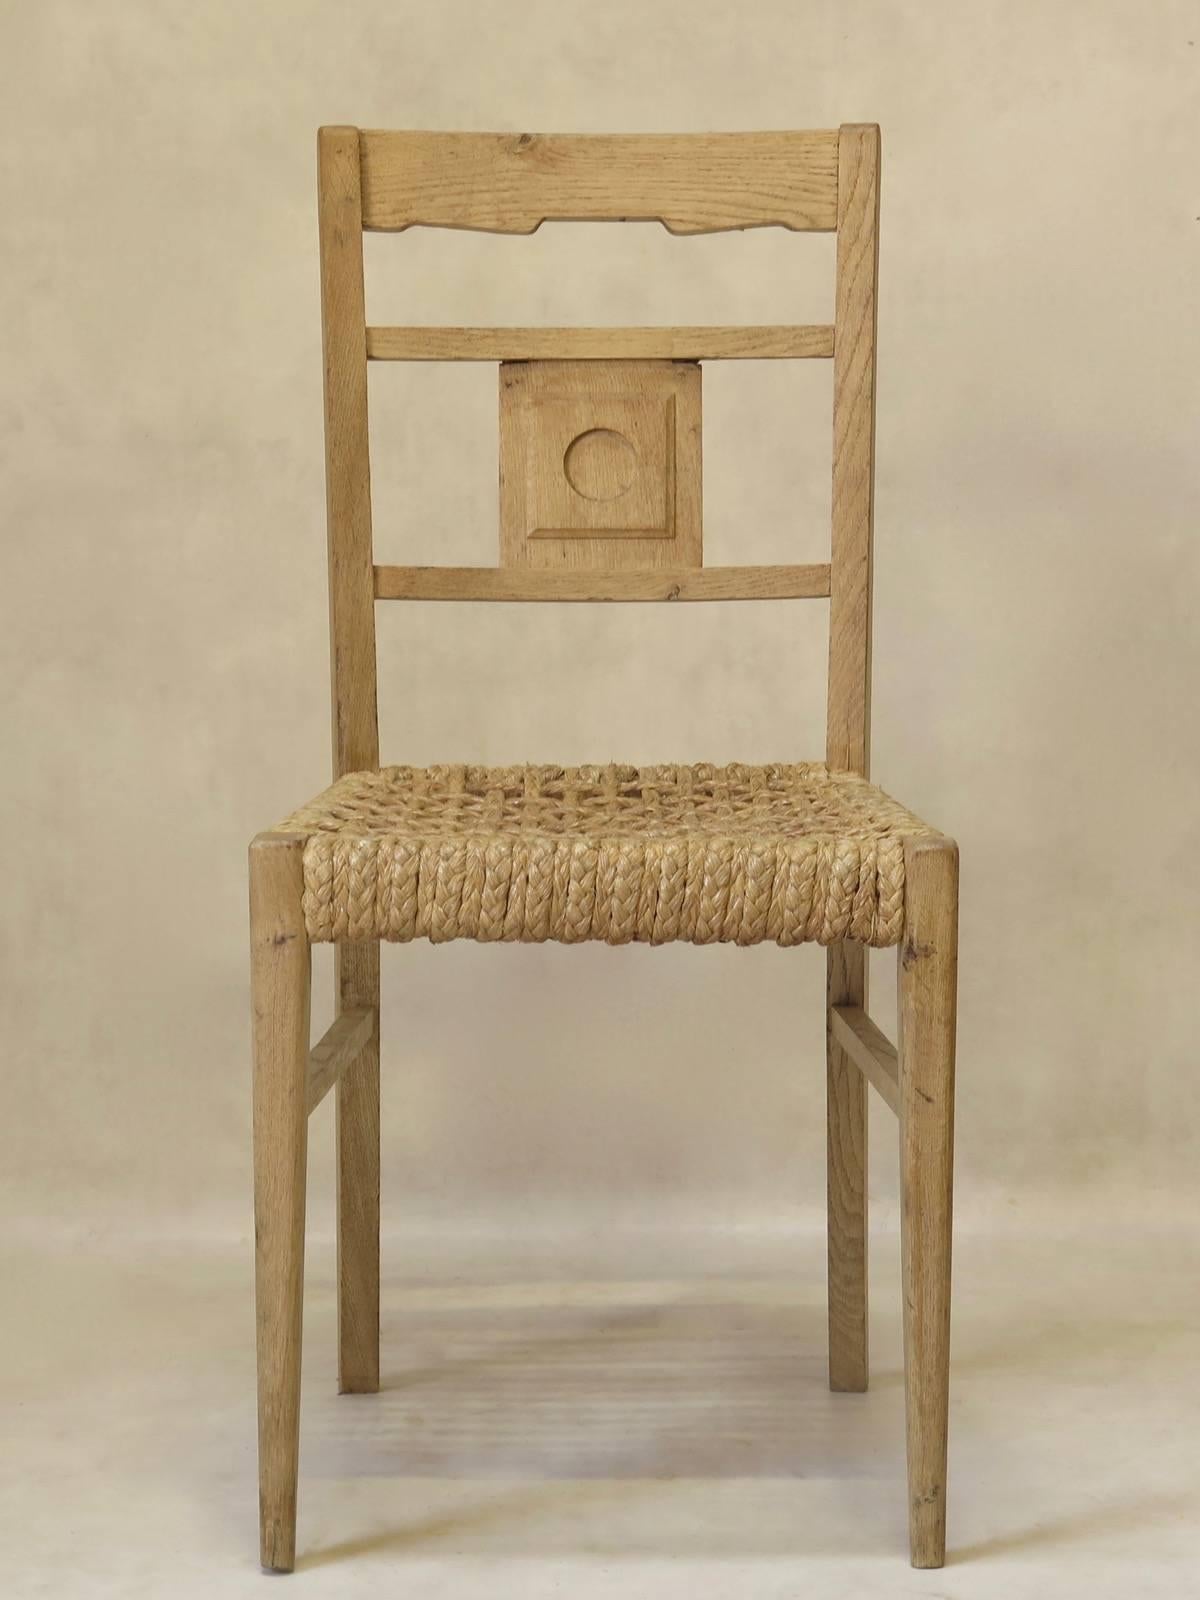 Chic and unfussy set of four oak dining chairs with rope seats, attributed to Adrien Audoux and Frida Minet, of Vibo Vesoul. The backs have a simple medallion decor. The front legs are tapered.